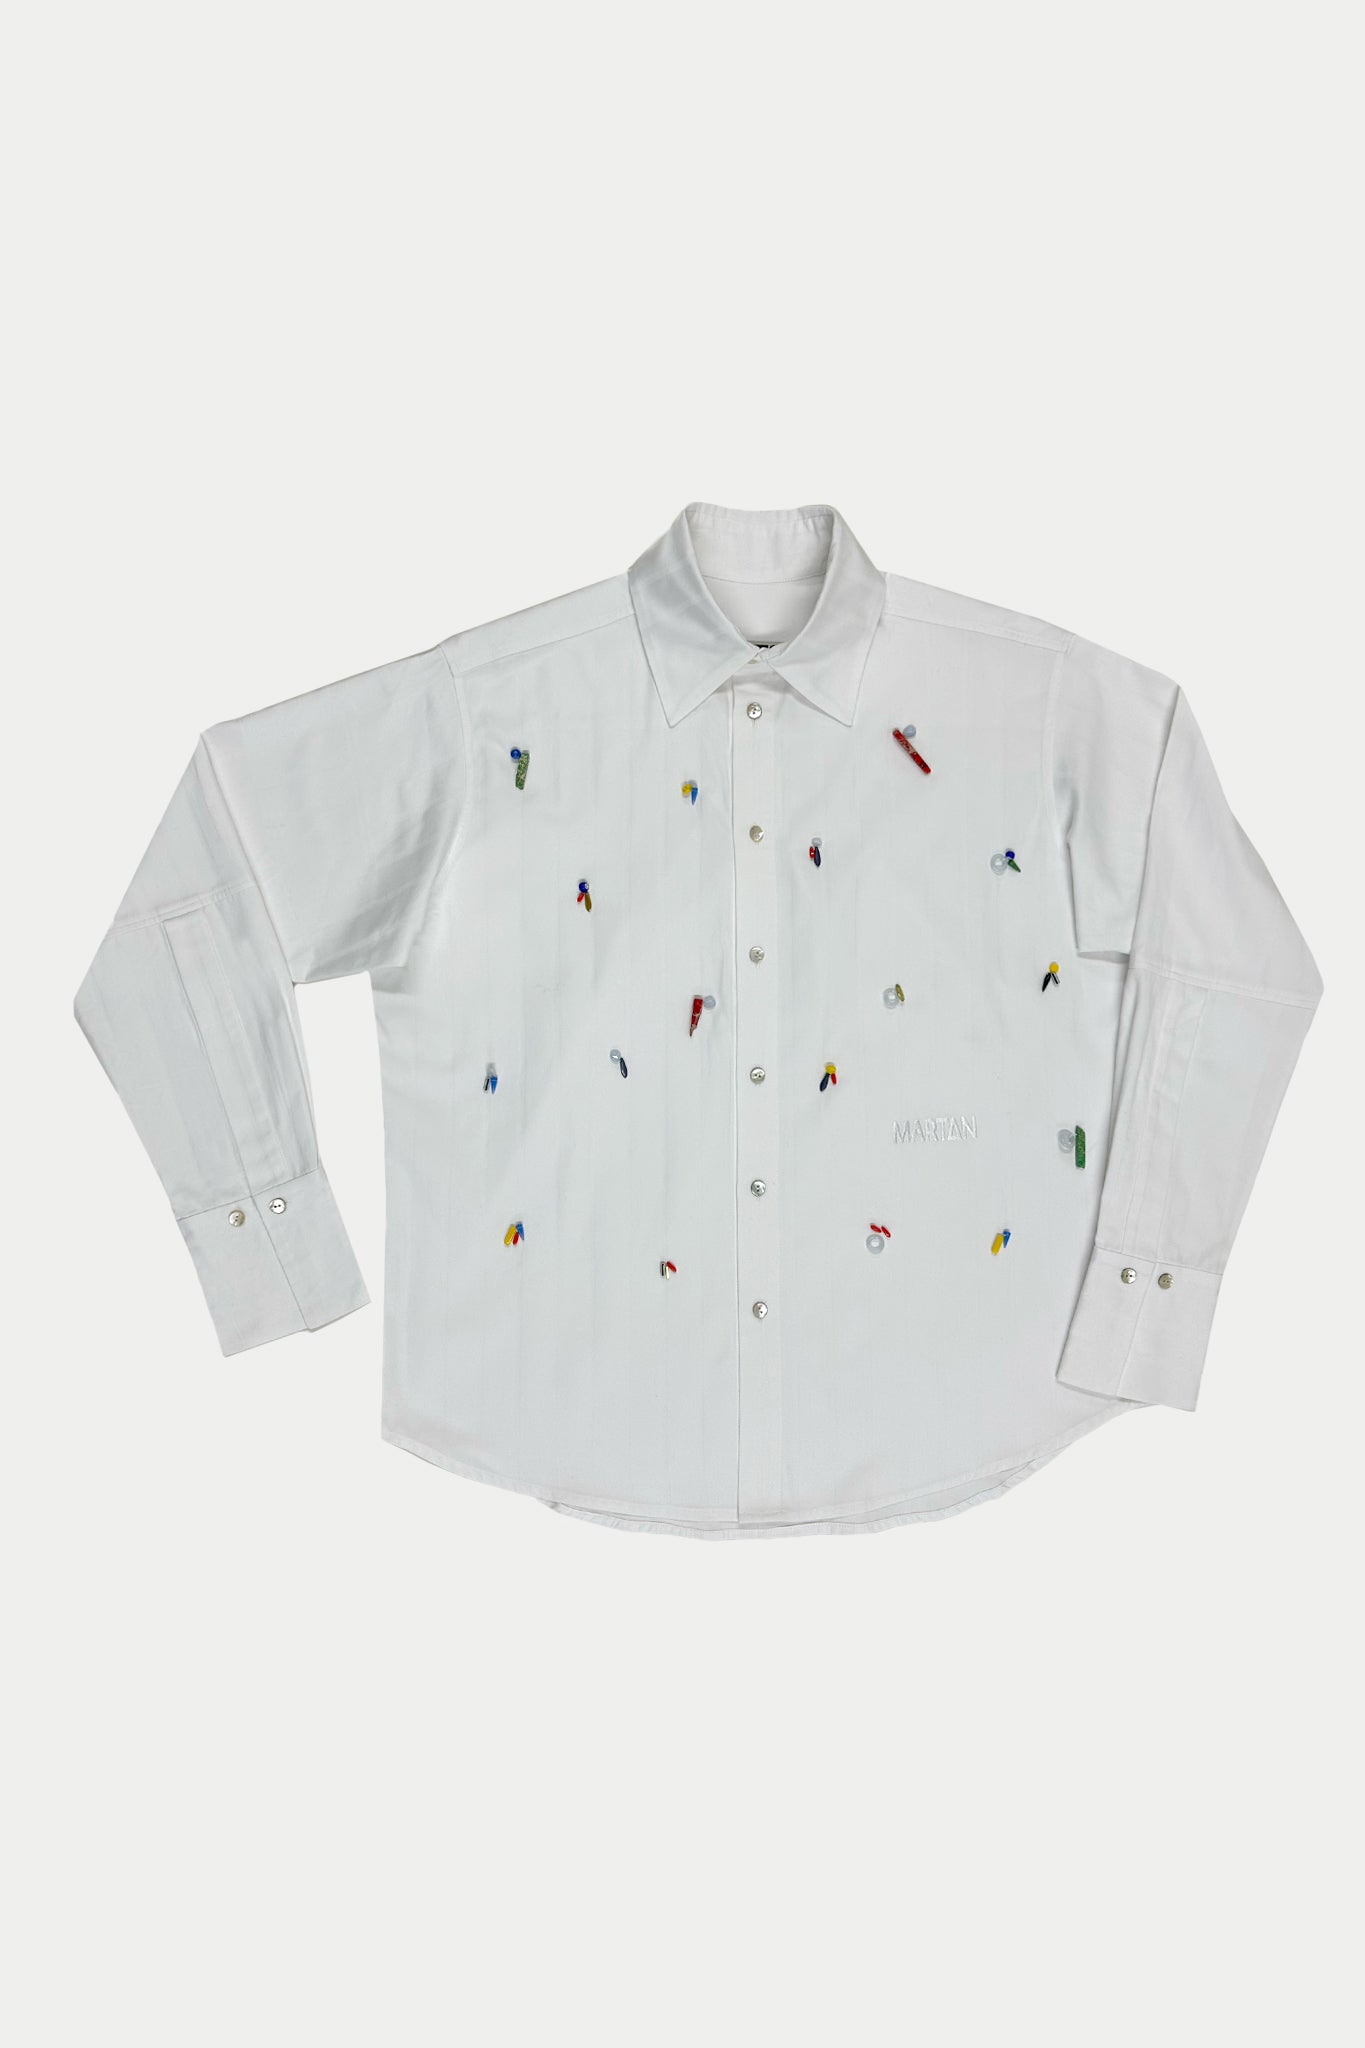 Marchi Shirt with Beads